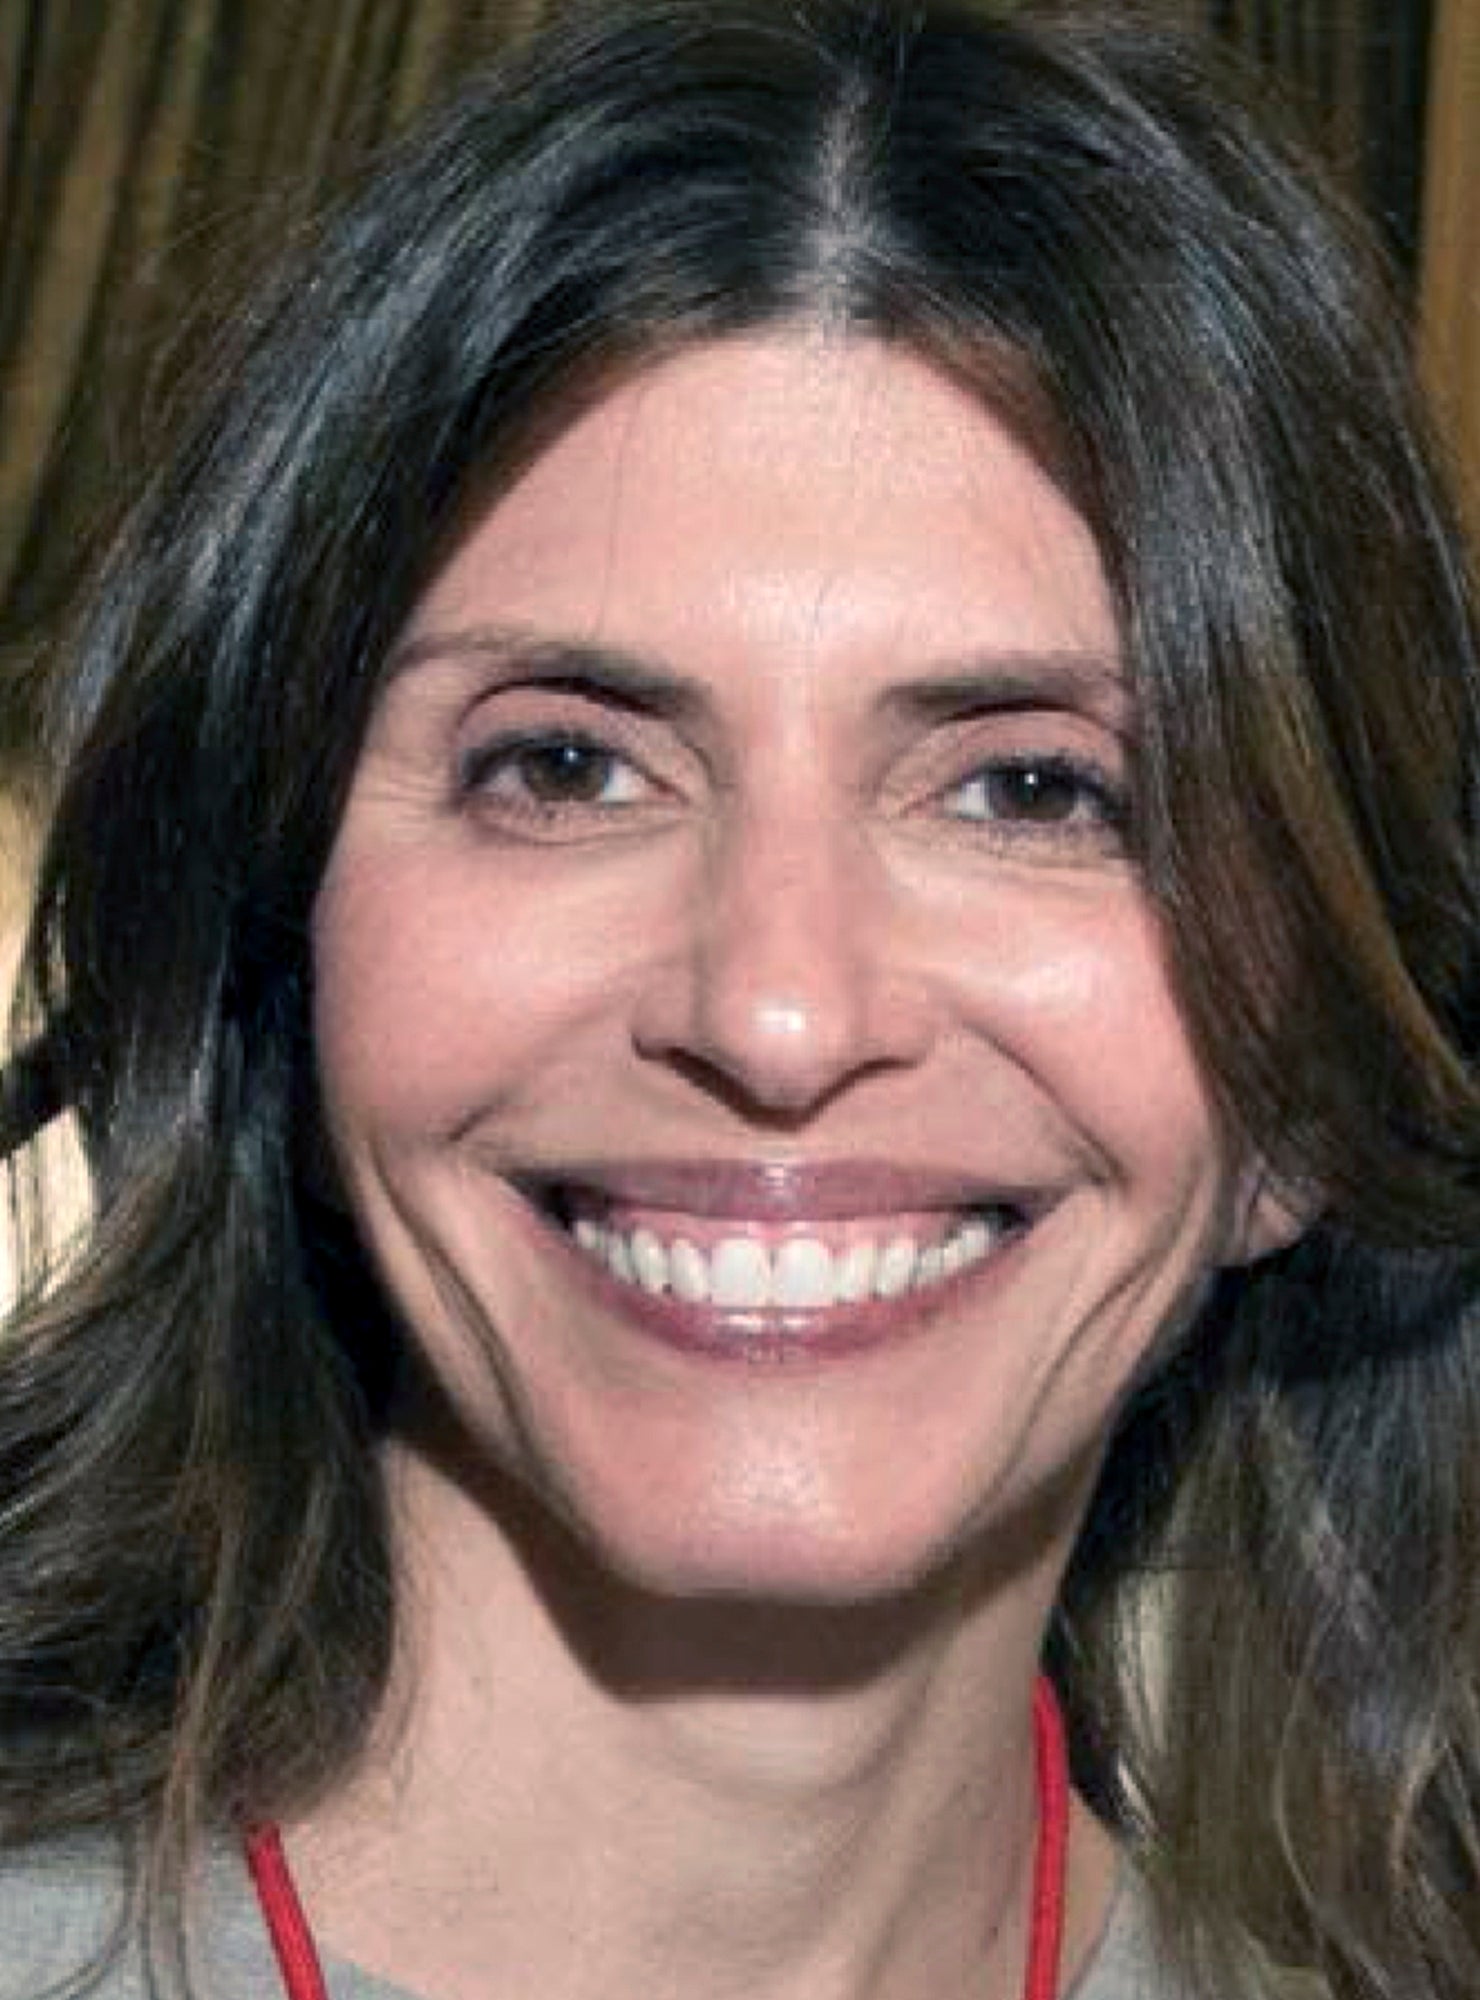 This undated file photo from a missing persons flier provided by the New Canaan Police Department shows Jennifer Dulos, a mother of five who went missing in May 2019